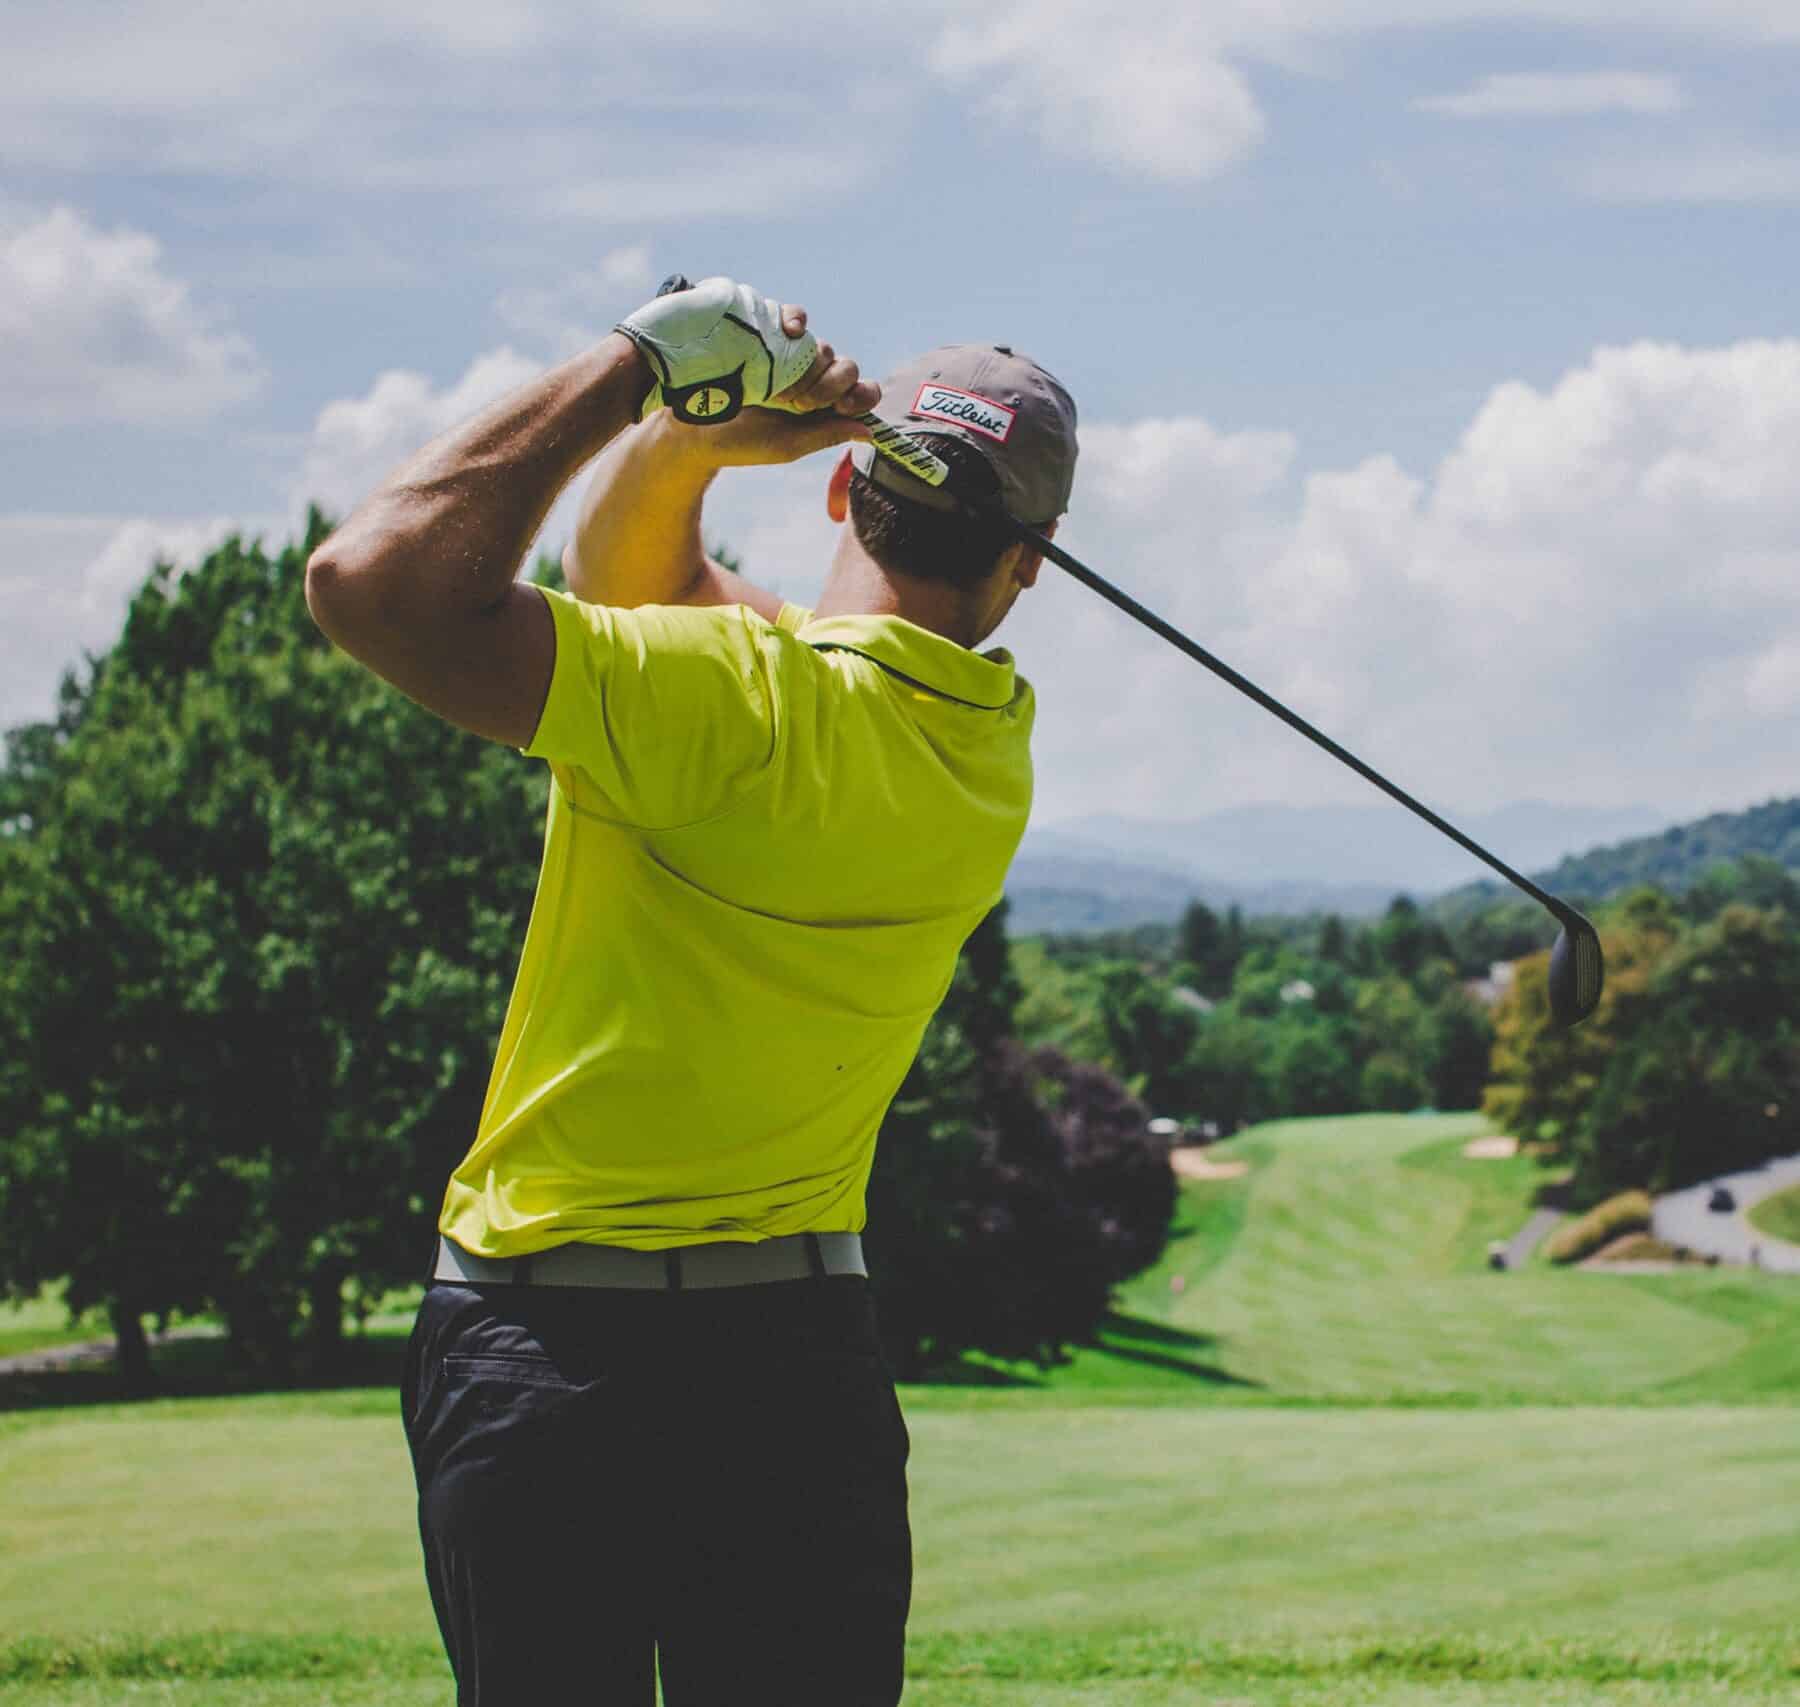 a man is playing golf in a bright green t-shirt. he is in the swinging position. it is a medium shot with his body cut off just above his knees. the foreground is the man. the background is a beautiful golf course on a part sunny day with white clouds